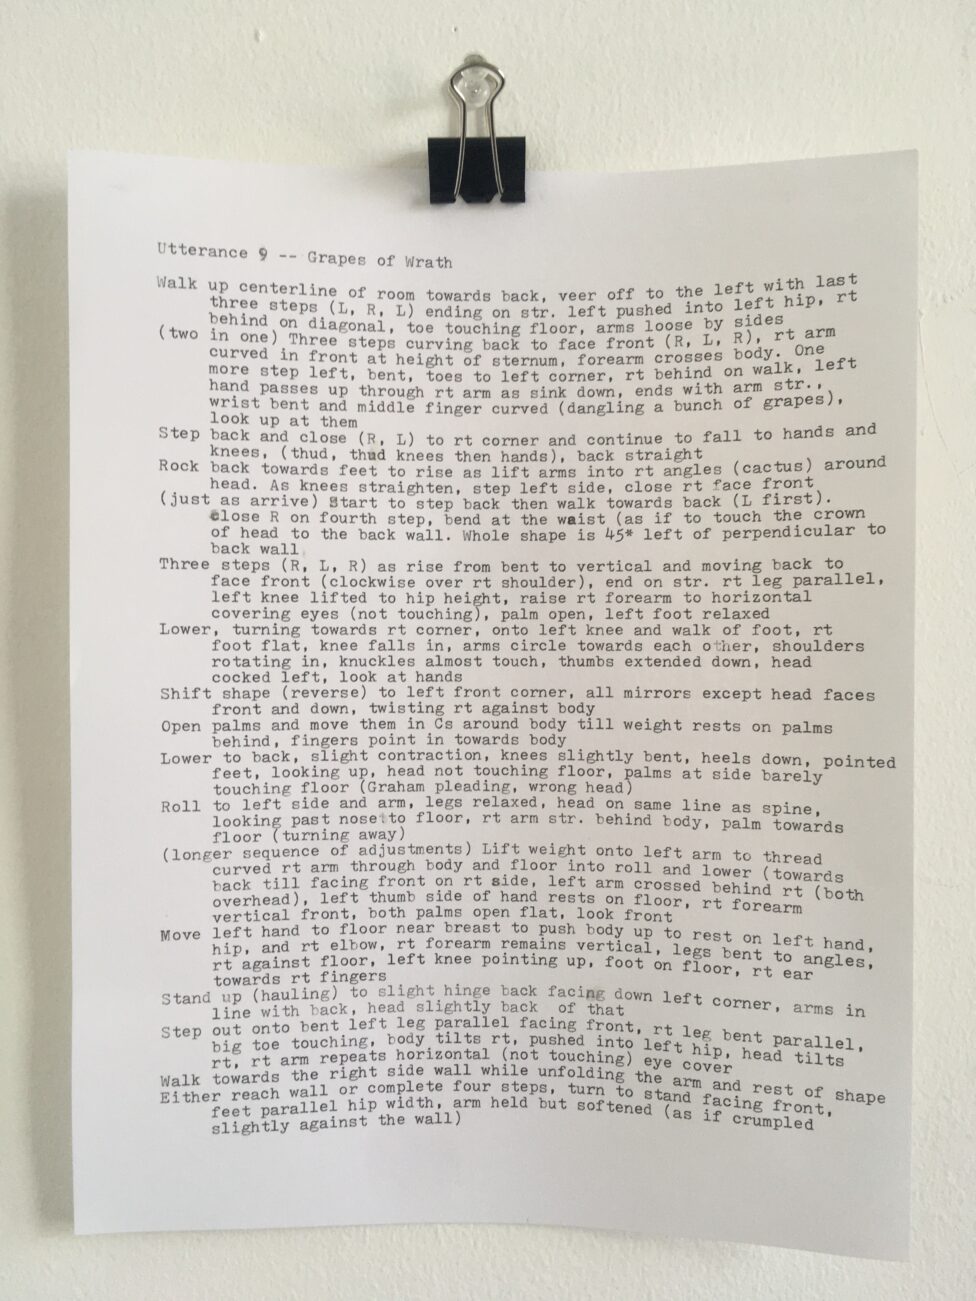 A typewritten page of 